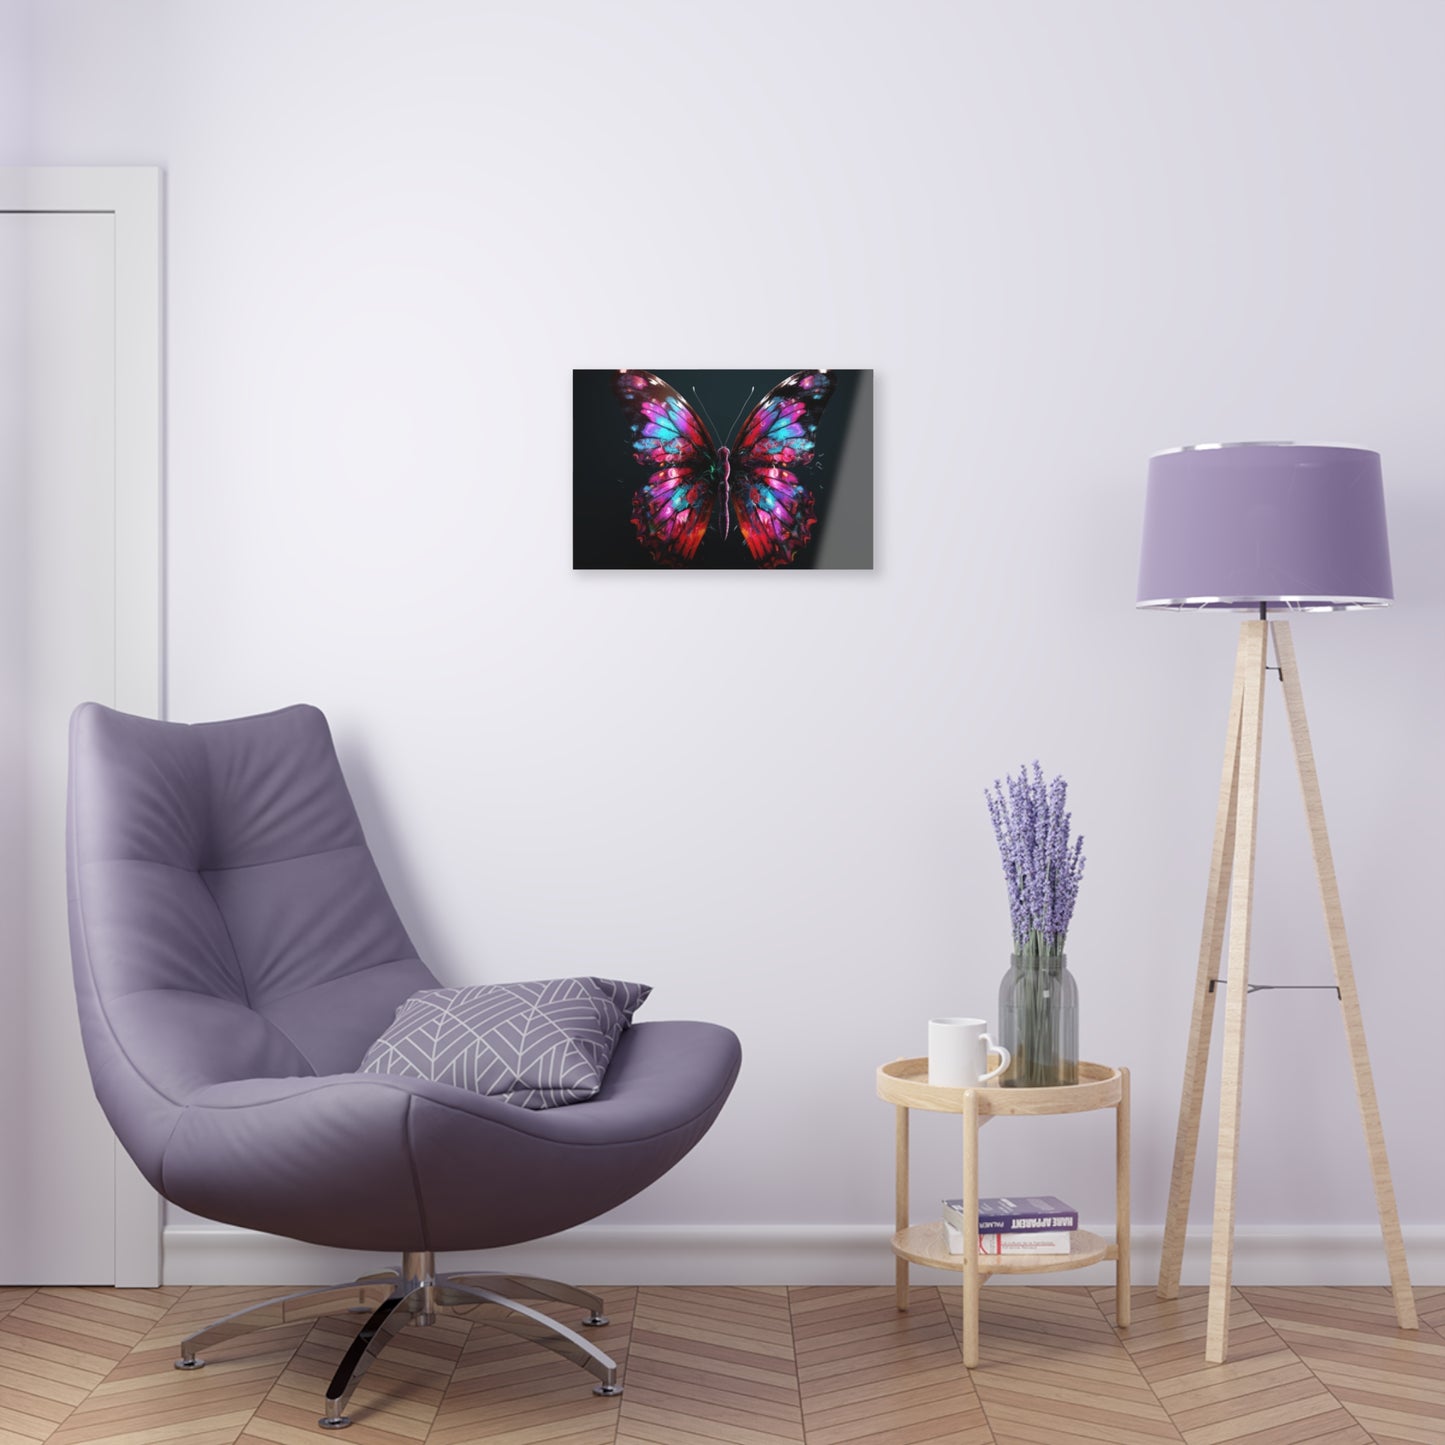 Acrylic Prints Hyper Colorful Butterfly Macro 3